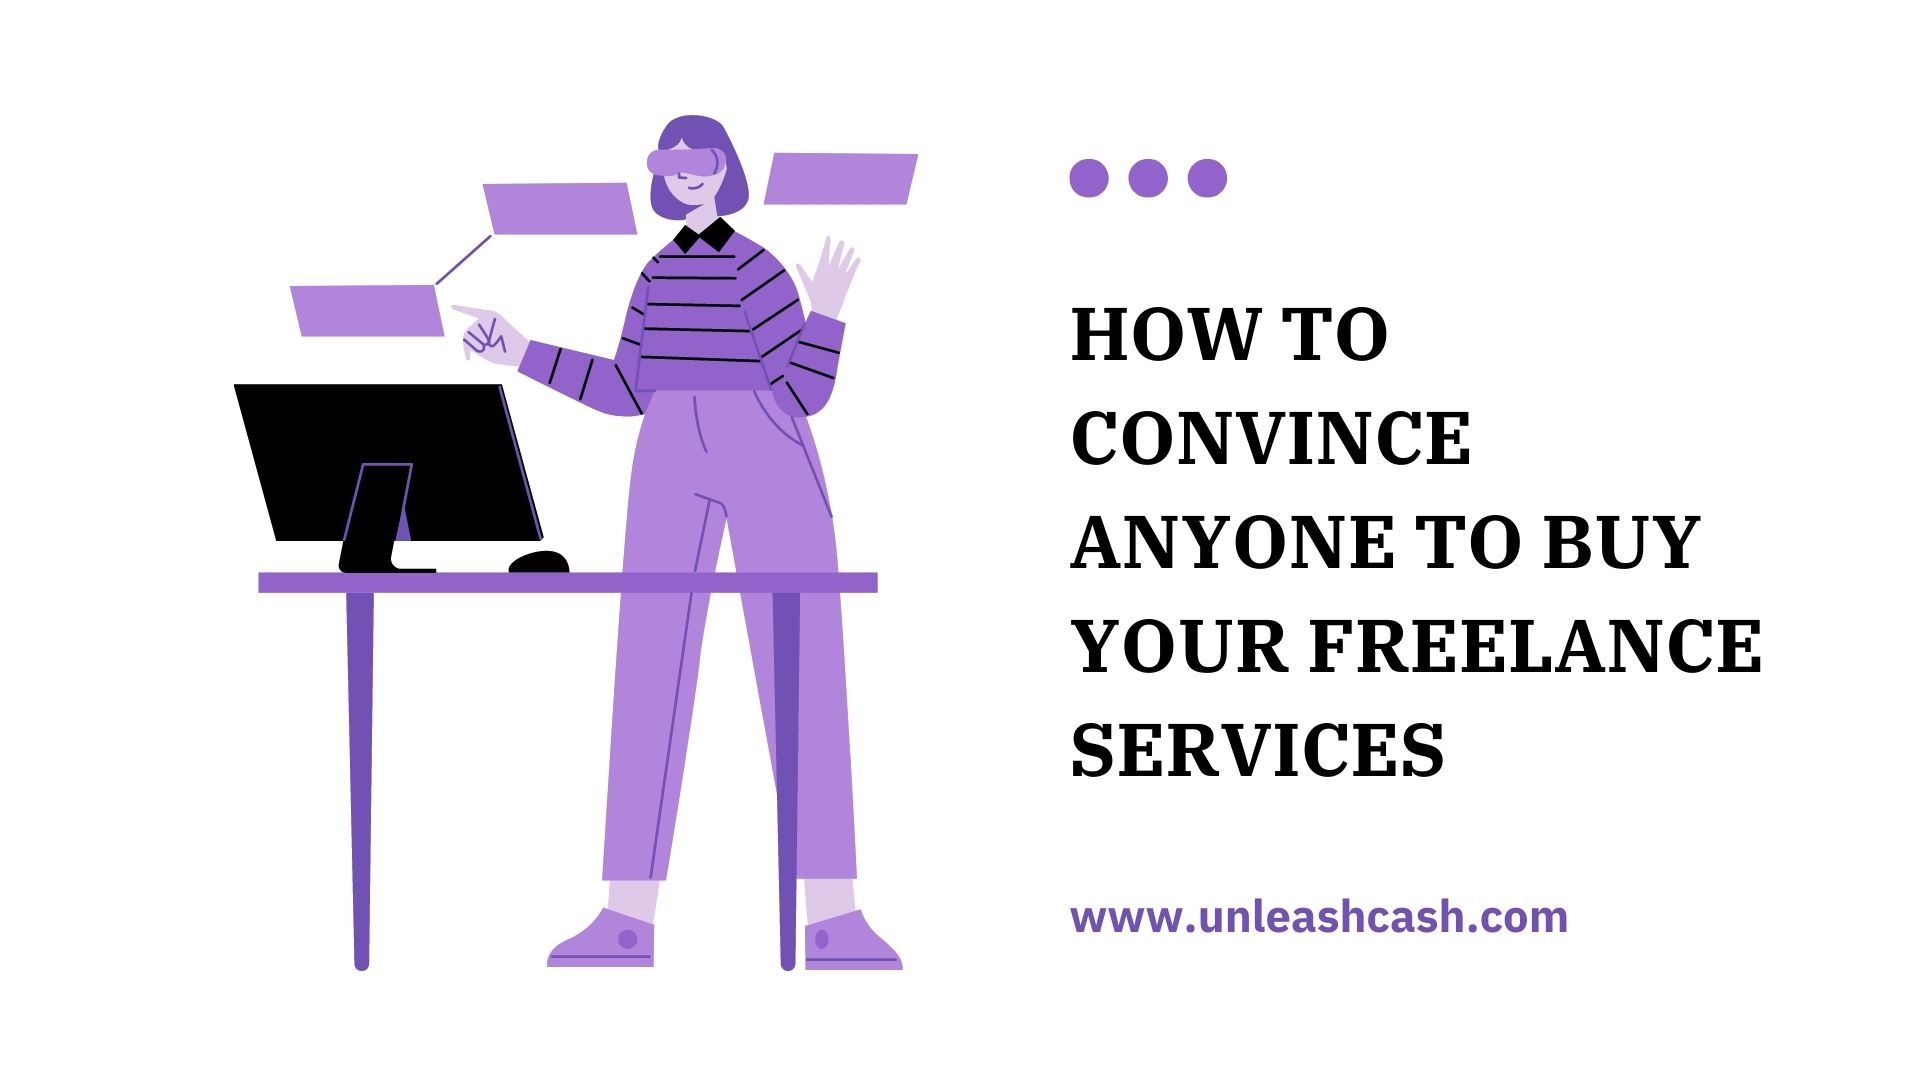 How To Convince Anyone To Buy Your Freelance Services